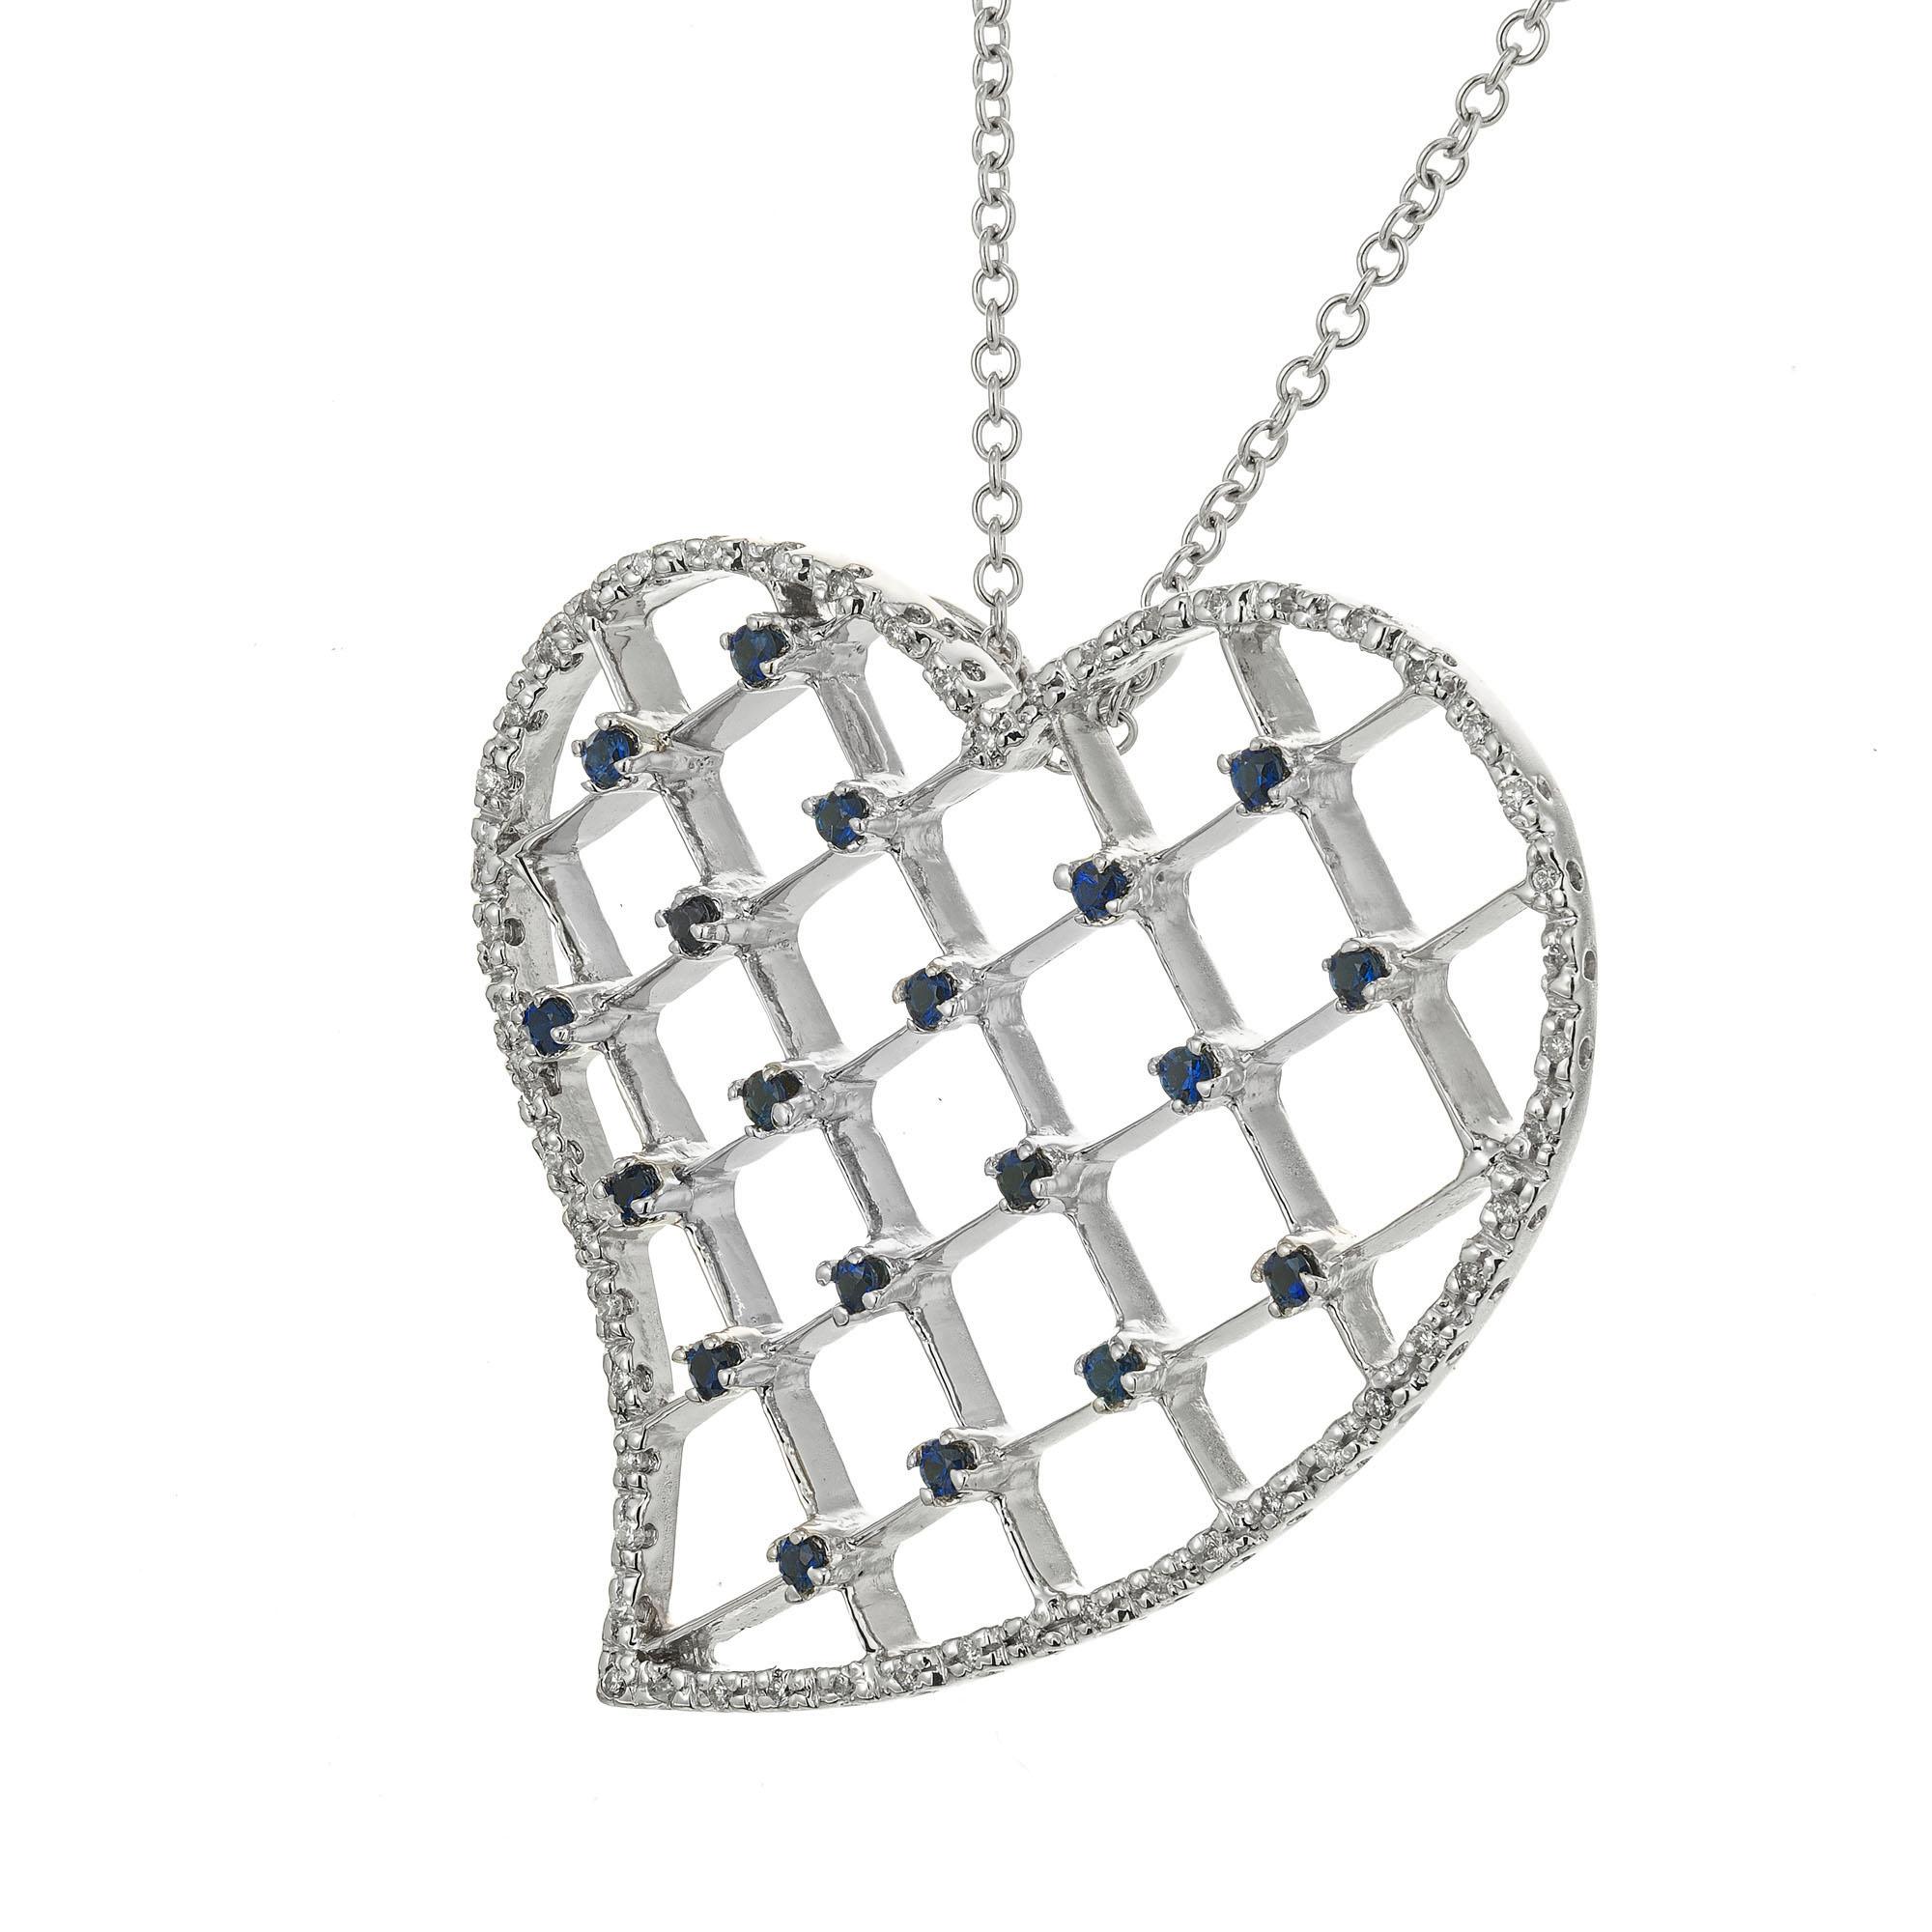 Sapphire and diamond heart pendant necklace. 19 round sapphires with a heart shaped 18k white gold halo of 48 round cut pave diamonds.  Signed by the designer VG. 18 inches in length. 

48 round diamonds approx. total weight .30cts, G, VS. 
19 round